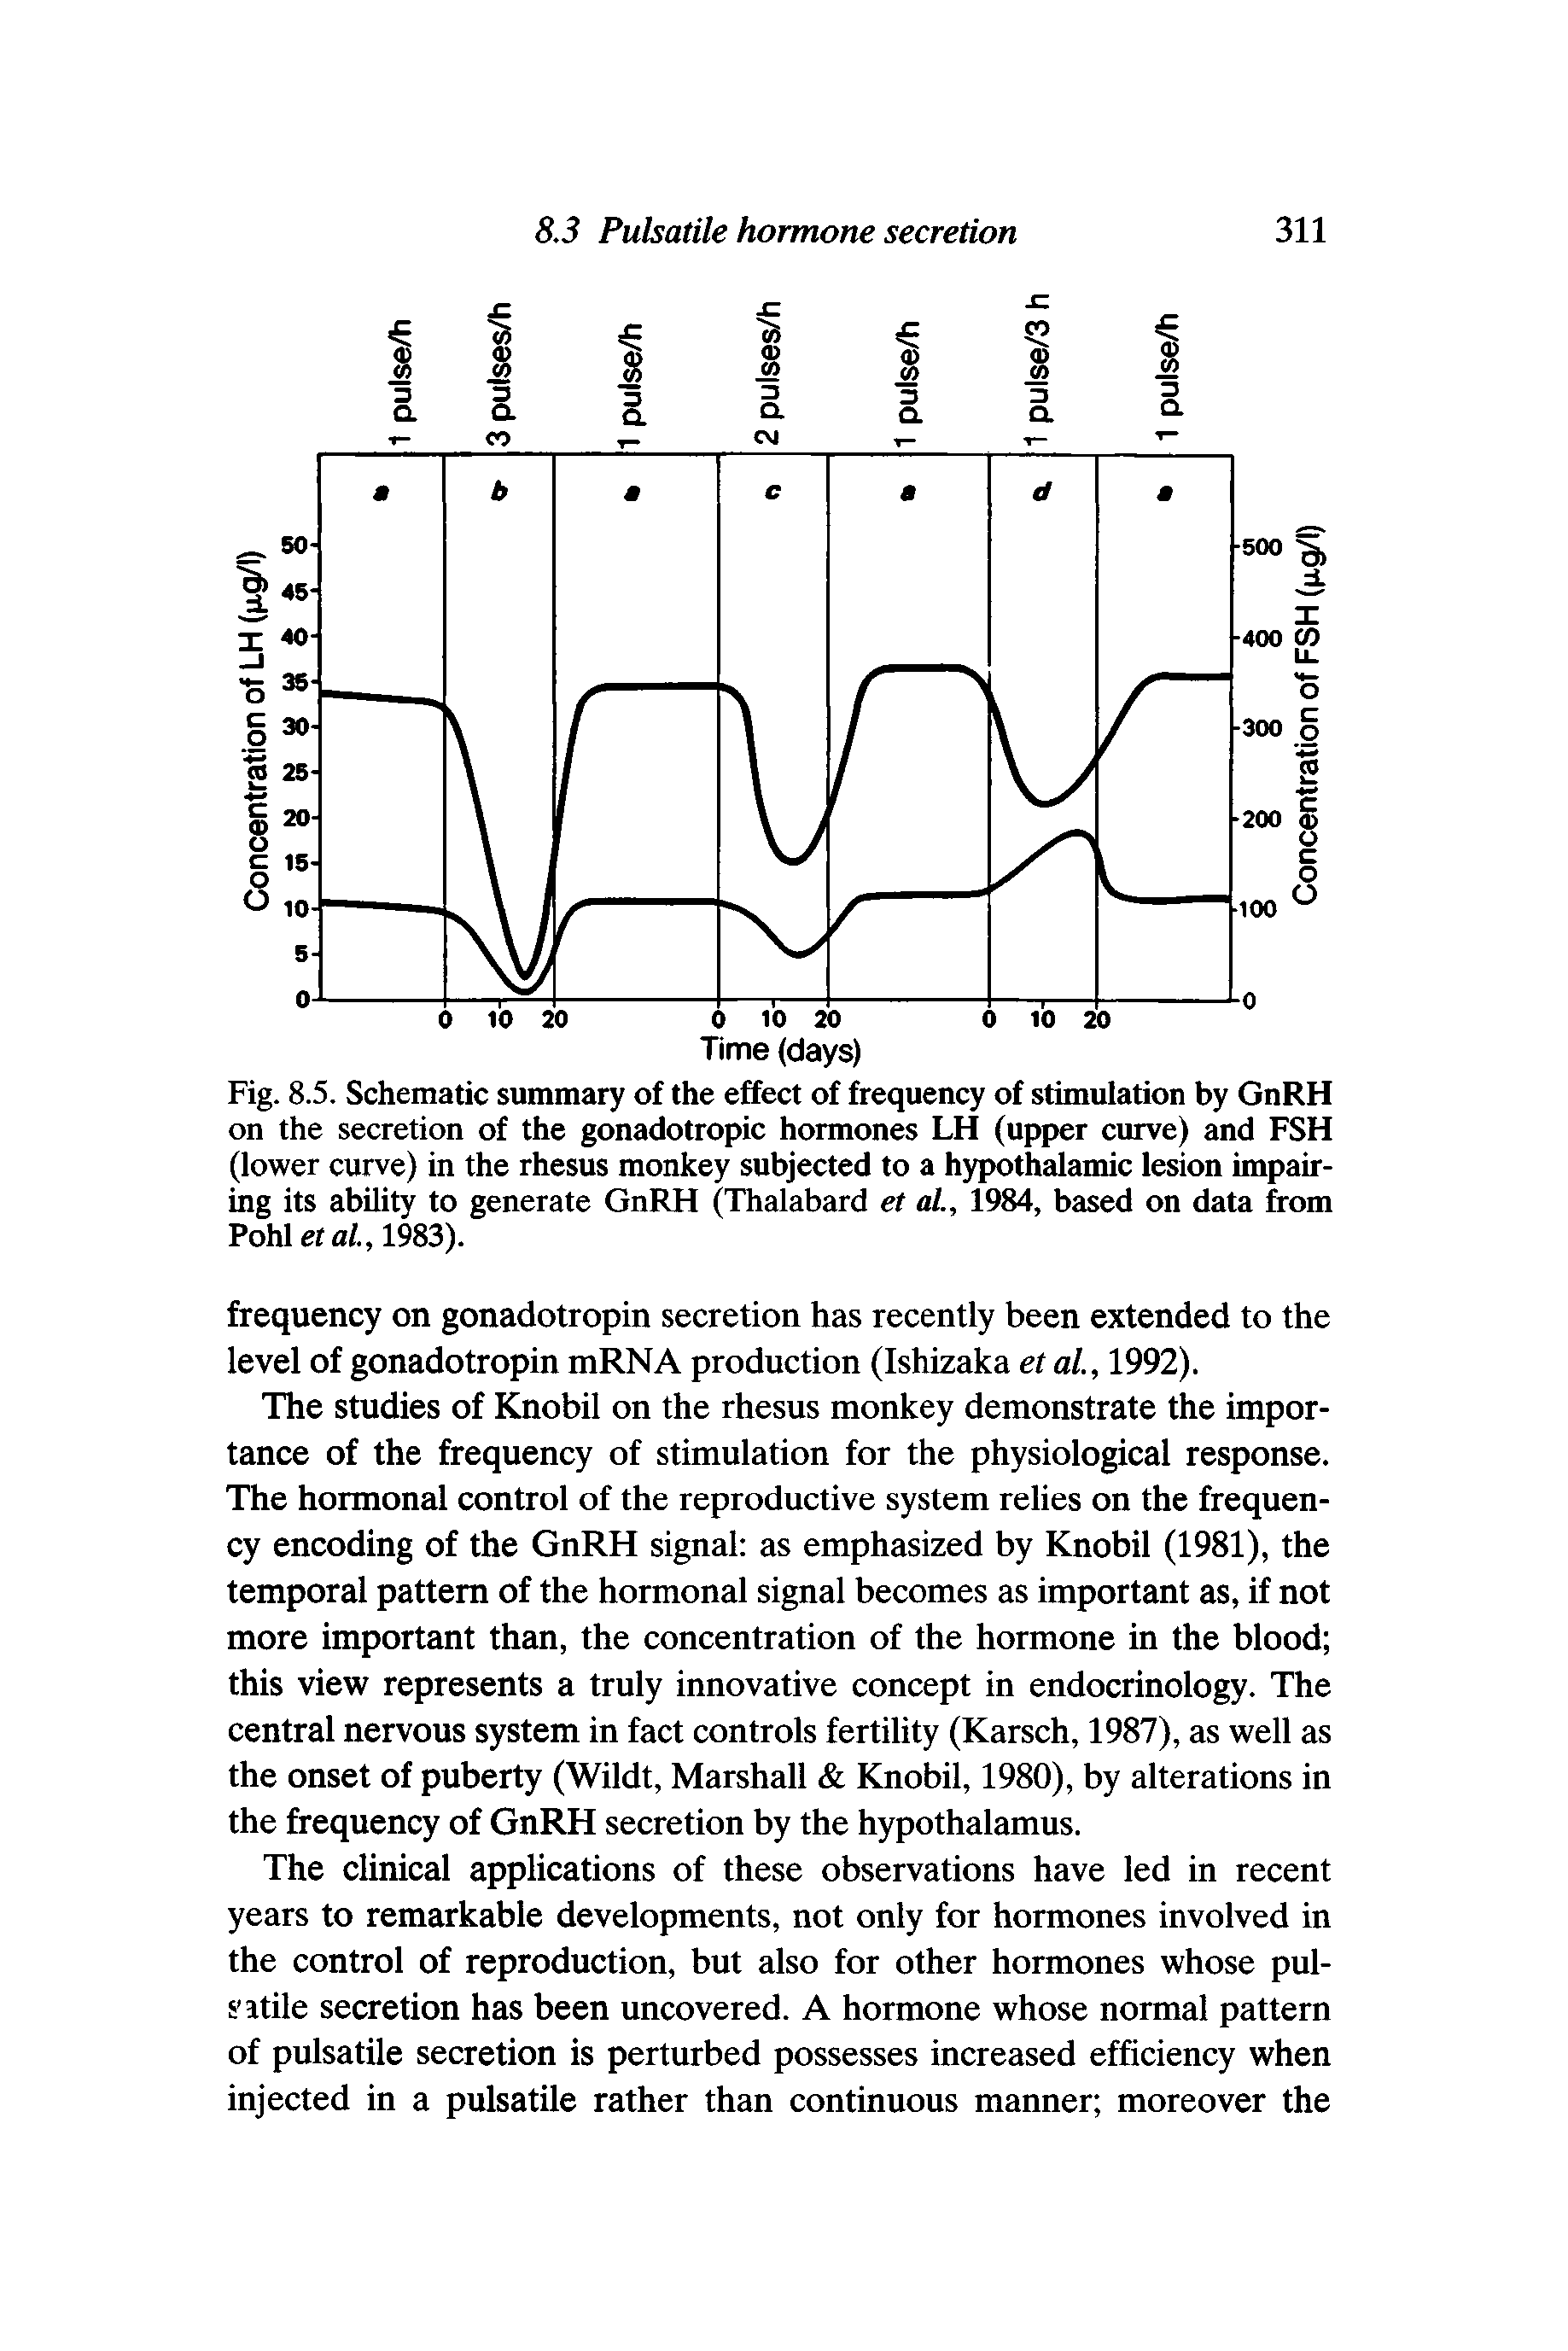 Fig. 8.5. Schematic summary of the effect of frequency of stimulation by GnRH on the secretion of the gonadotropic hormones LH (upper curve) and FSH (lower curve) in the rhesus monkey subjected to a hypothalamic lesion impairing its ability to generate GnRH (Thalabard et al, 1984, based on data from Pohletfll.,1983).